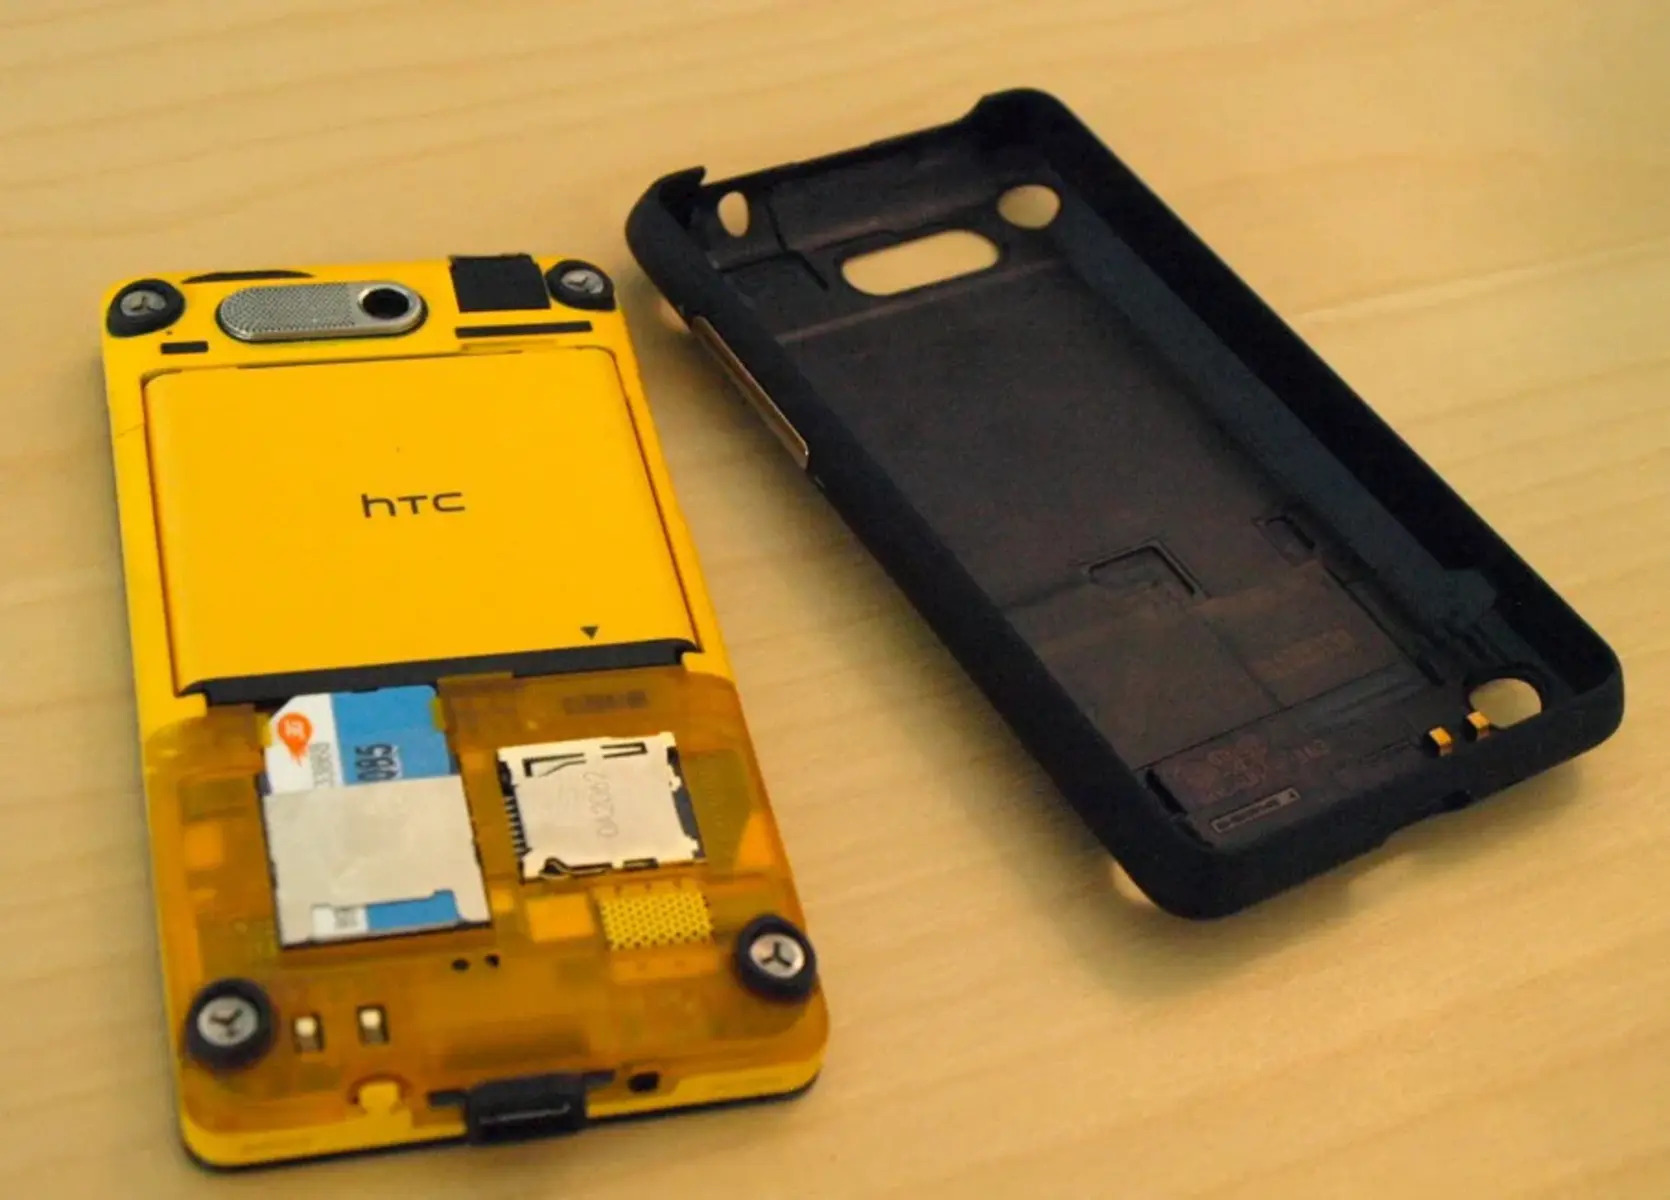 removing-sim-card-from-htc-aria-step-by-step-guide